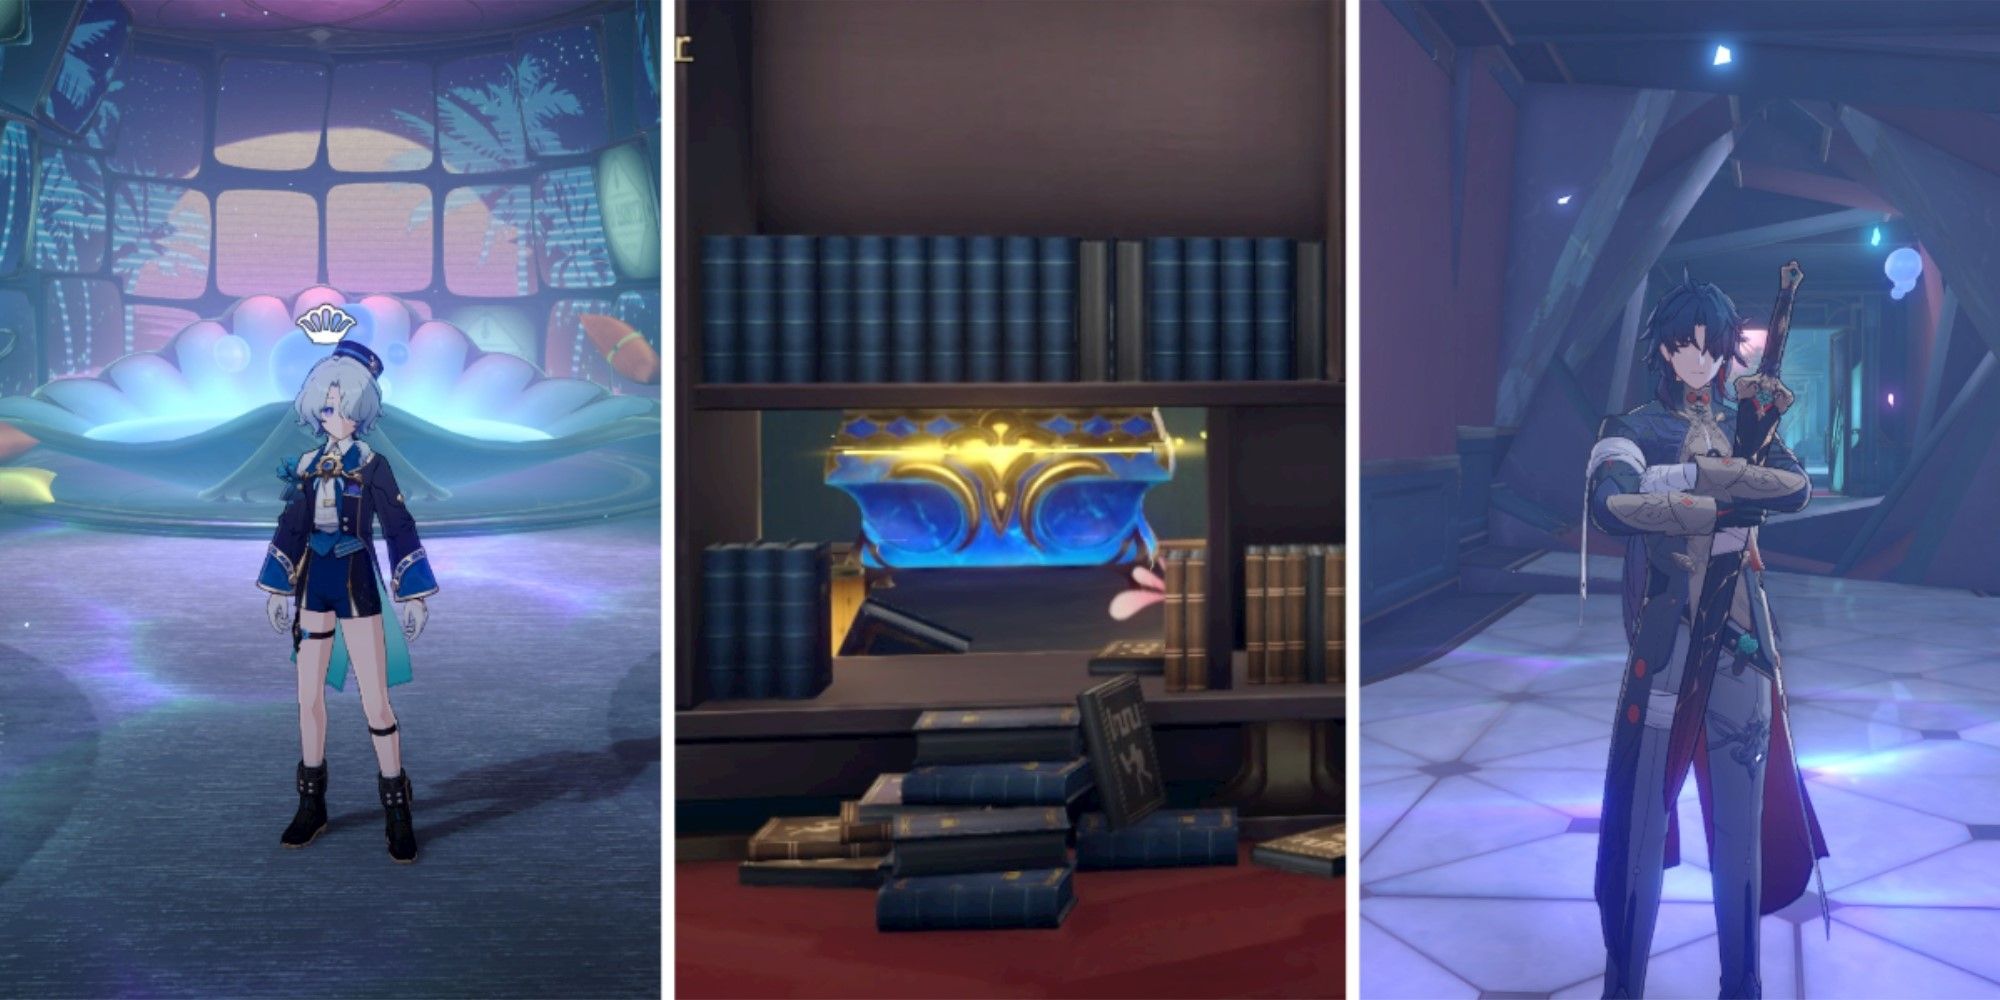 Images from Honkai Star Rail. Left: Misha stands in front of a bed. Centre: A treasure chest is behind a bookcase. Left: Blade stands in front of a moving hallway.